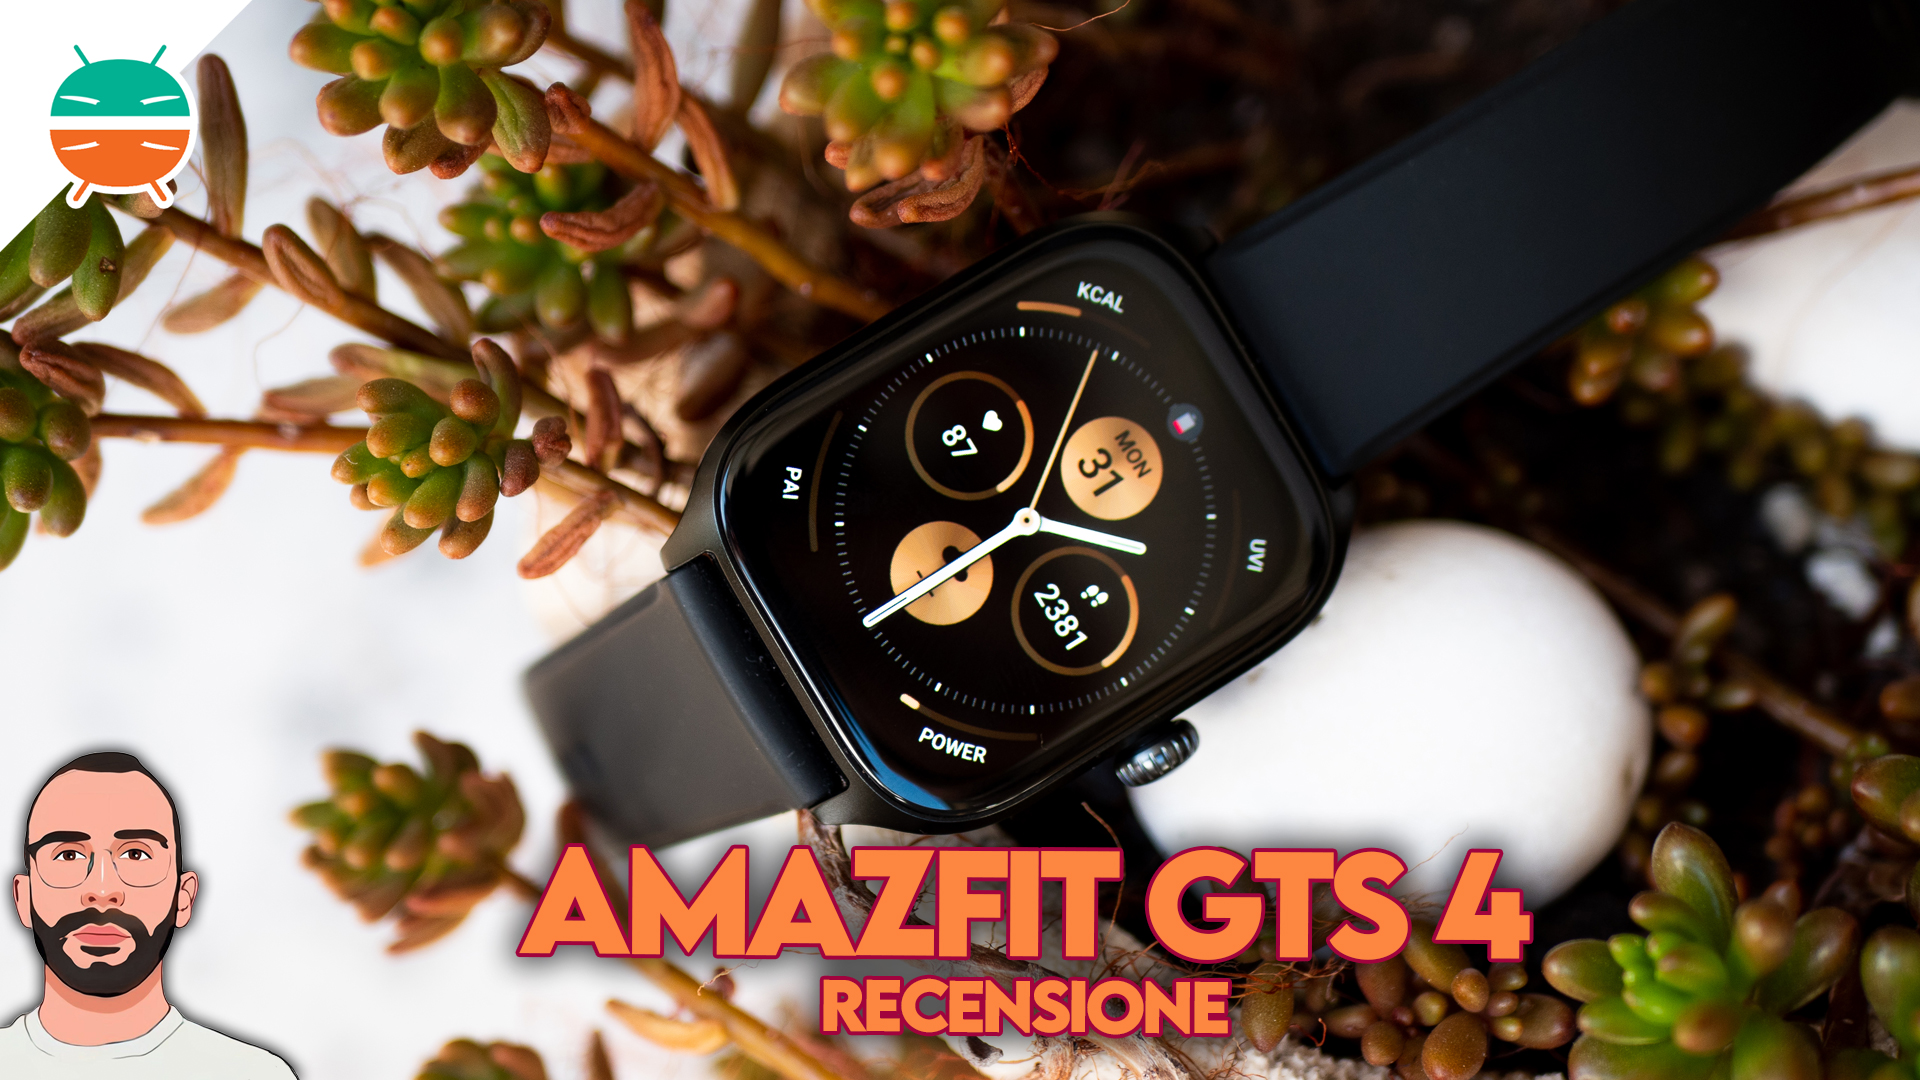 Amazfit GTS 2 Review with pros and cons - Should you buy it? - Smartprix.com